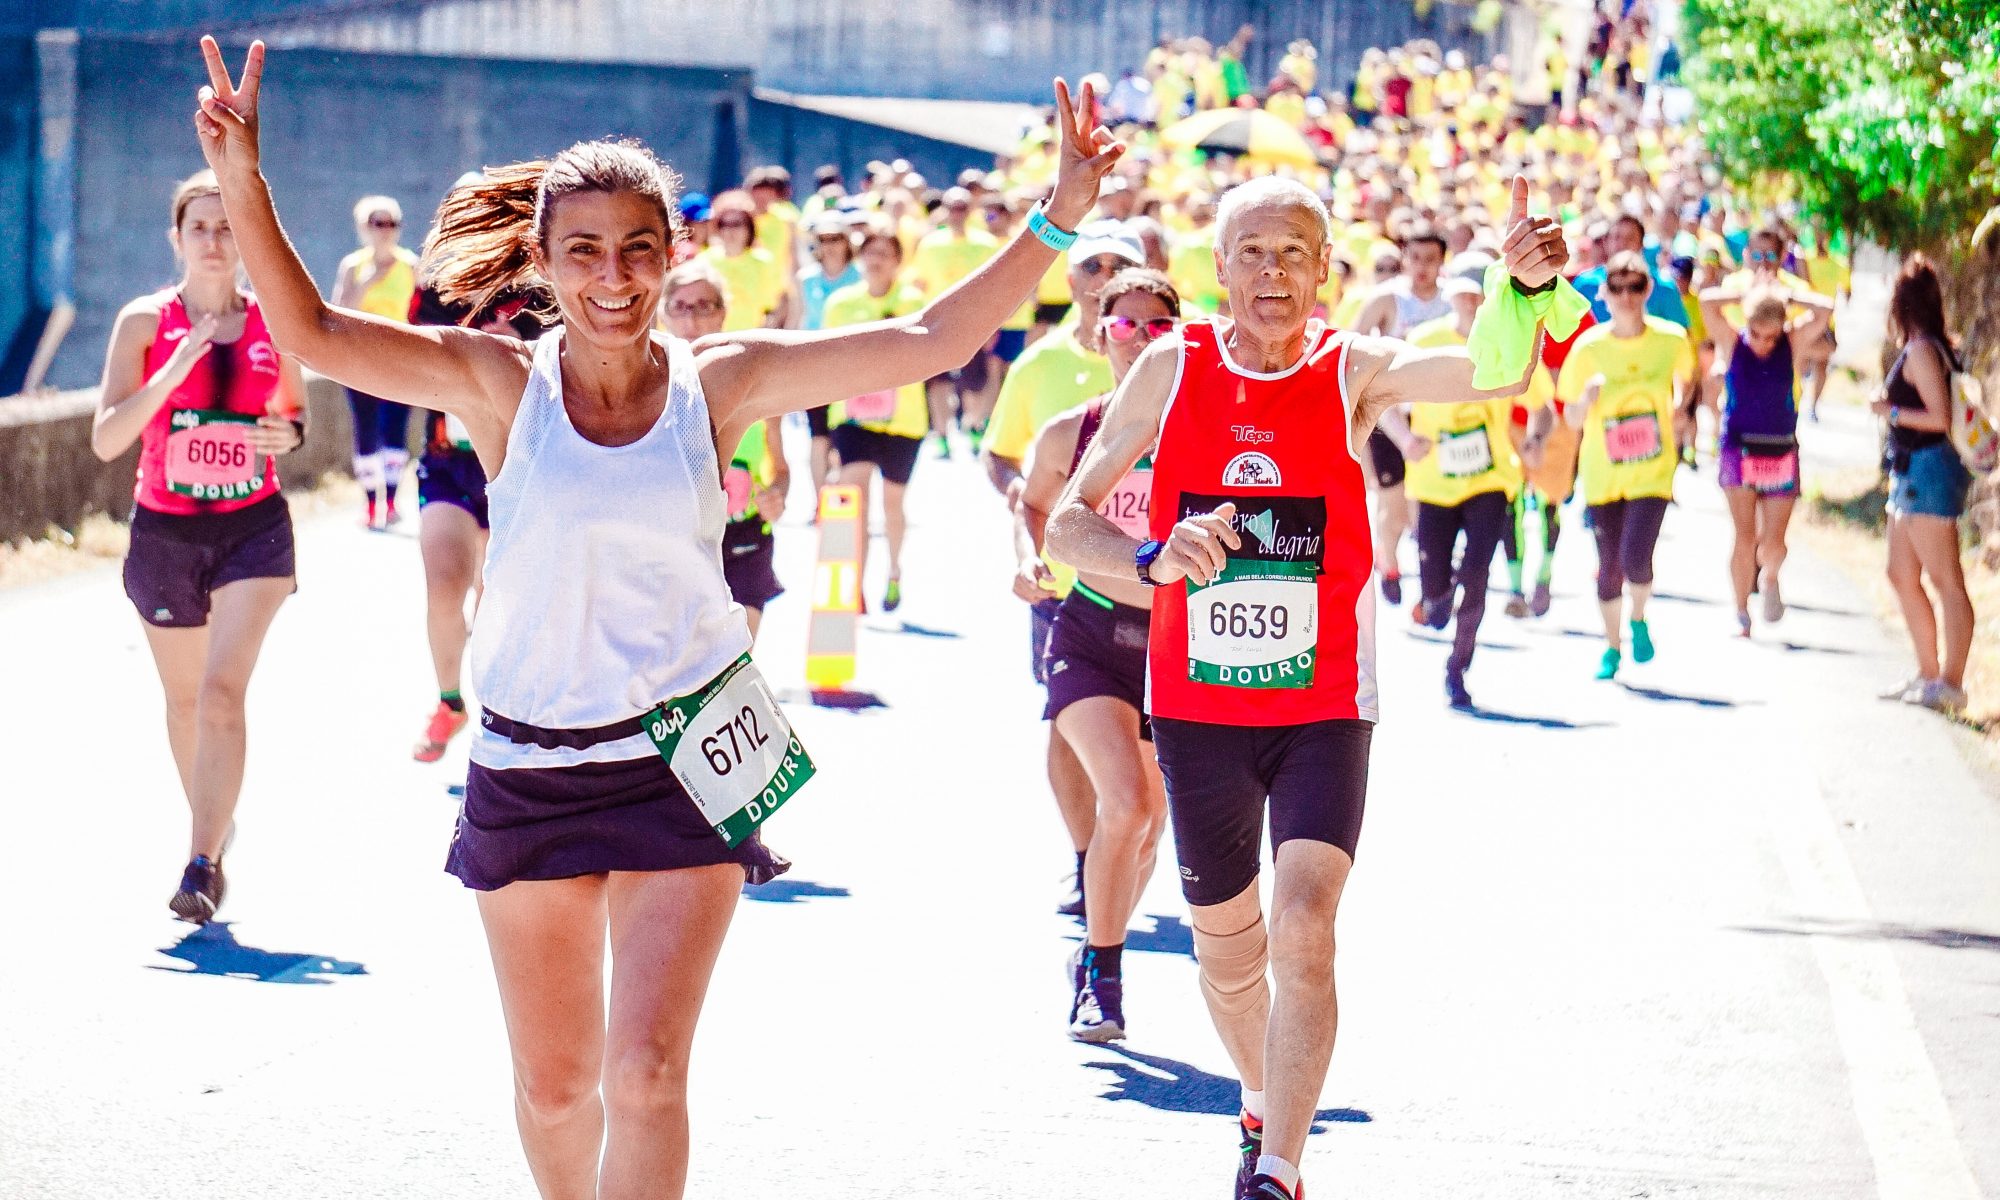 Canva - Female and Male Runners on a Marathon